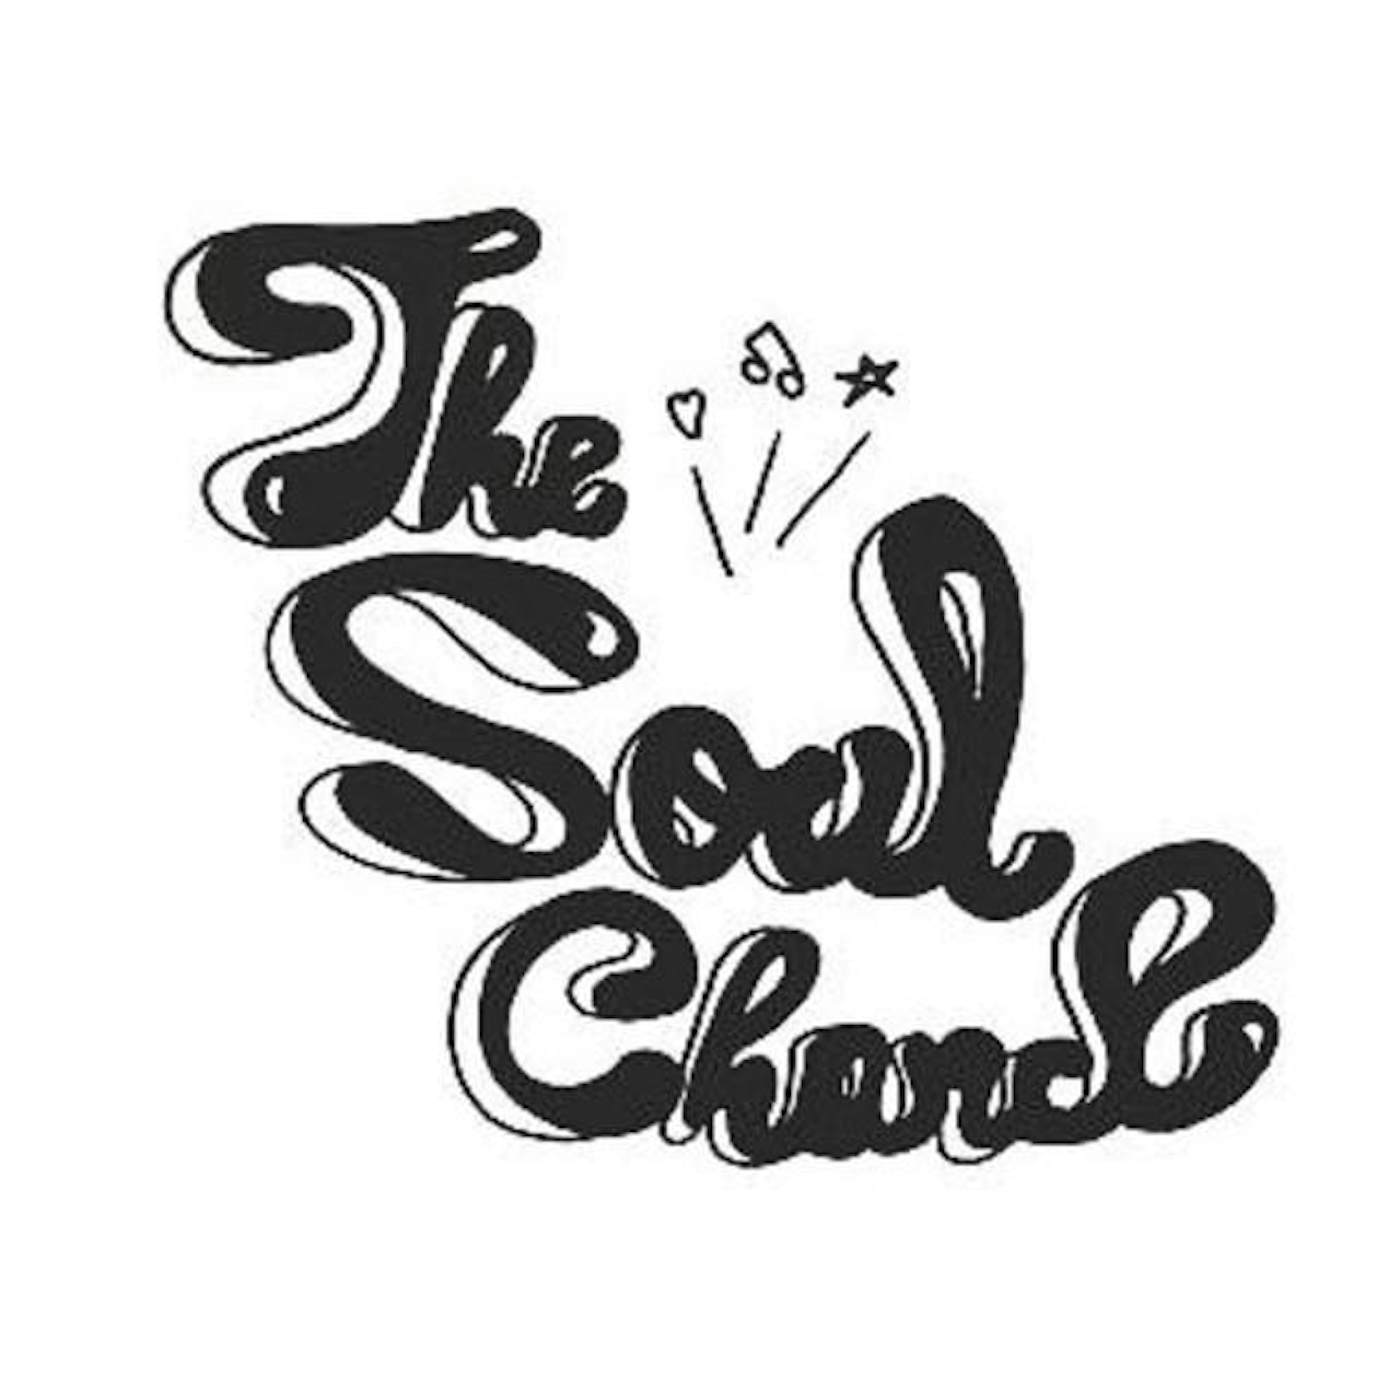 The Soul Chance